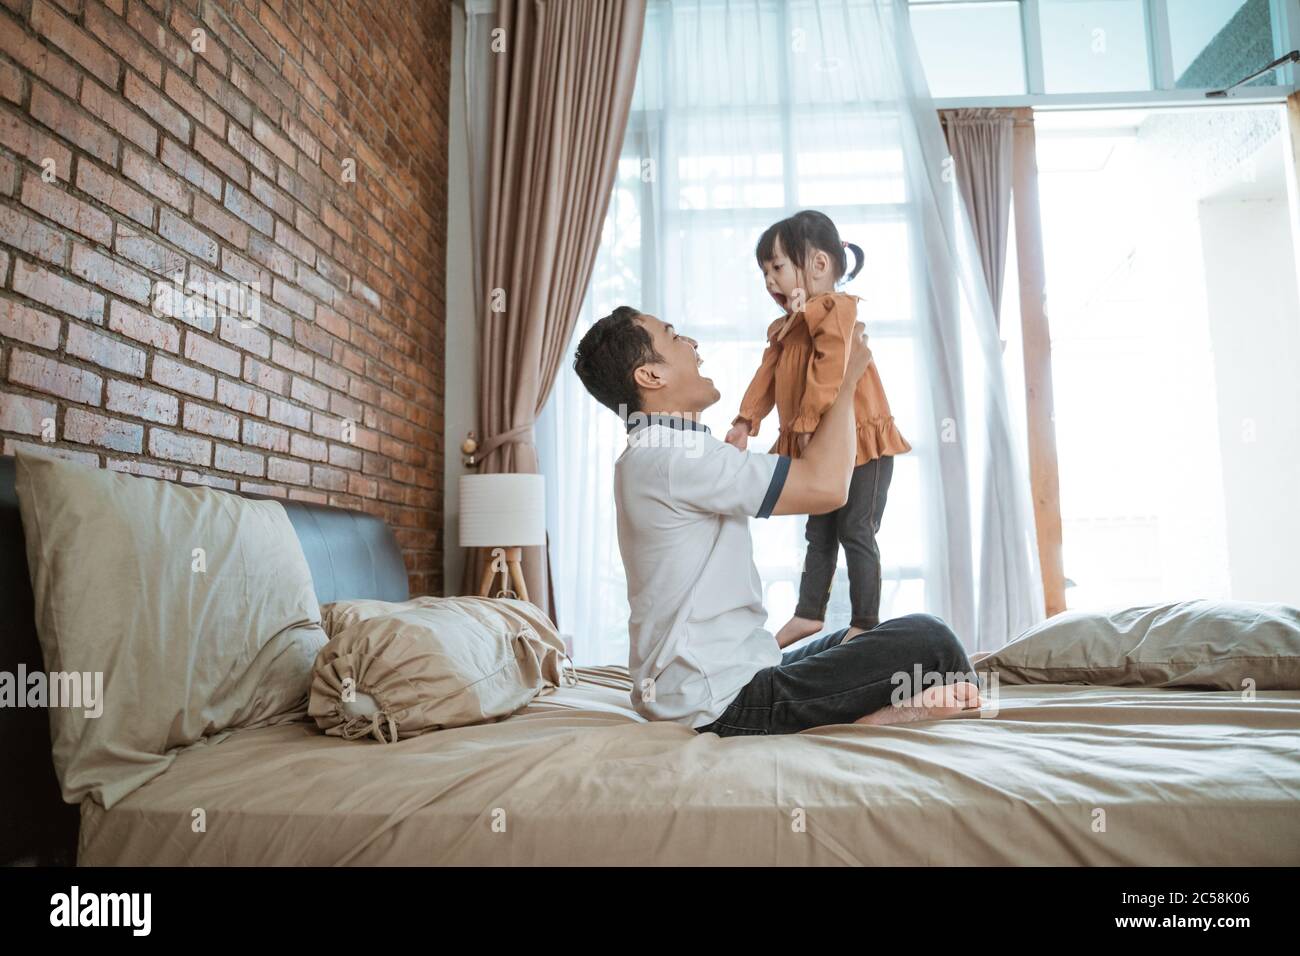 https://c8.alamy.com/comp/2C58K06/asian-father-plays-with-his-little-daughter-on-his-lap-while-sitting-on-the-bed-2C58K06.jpg